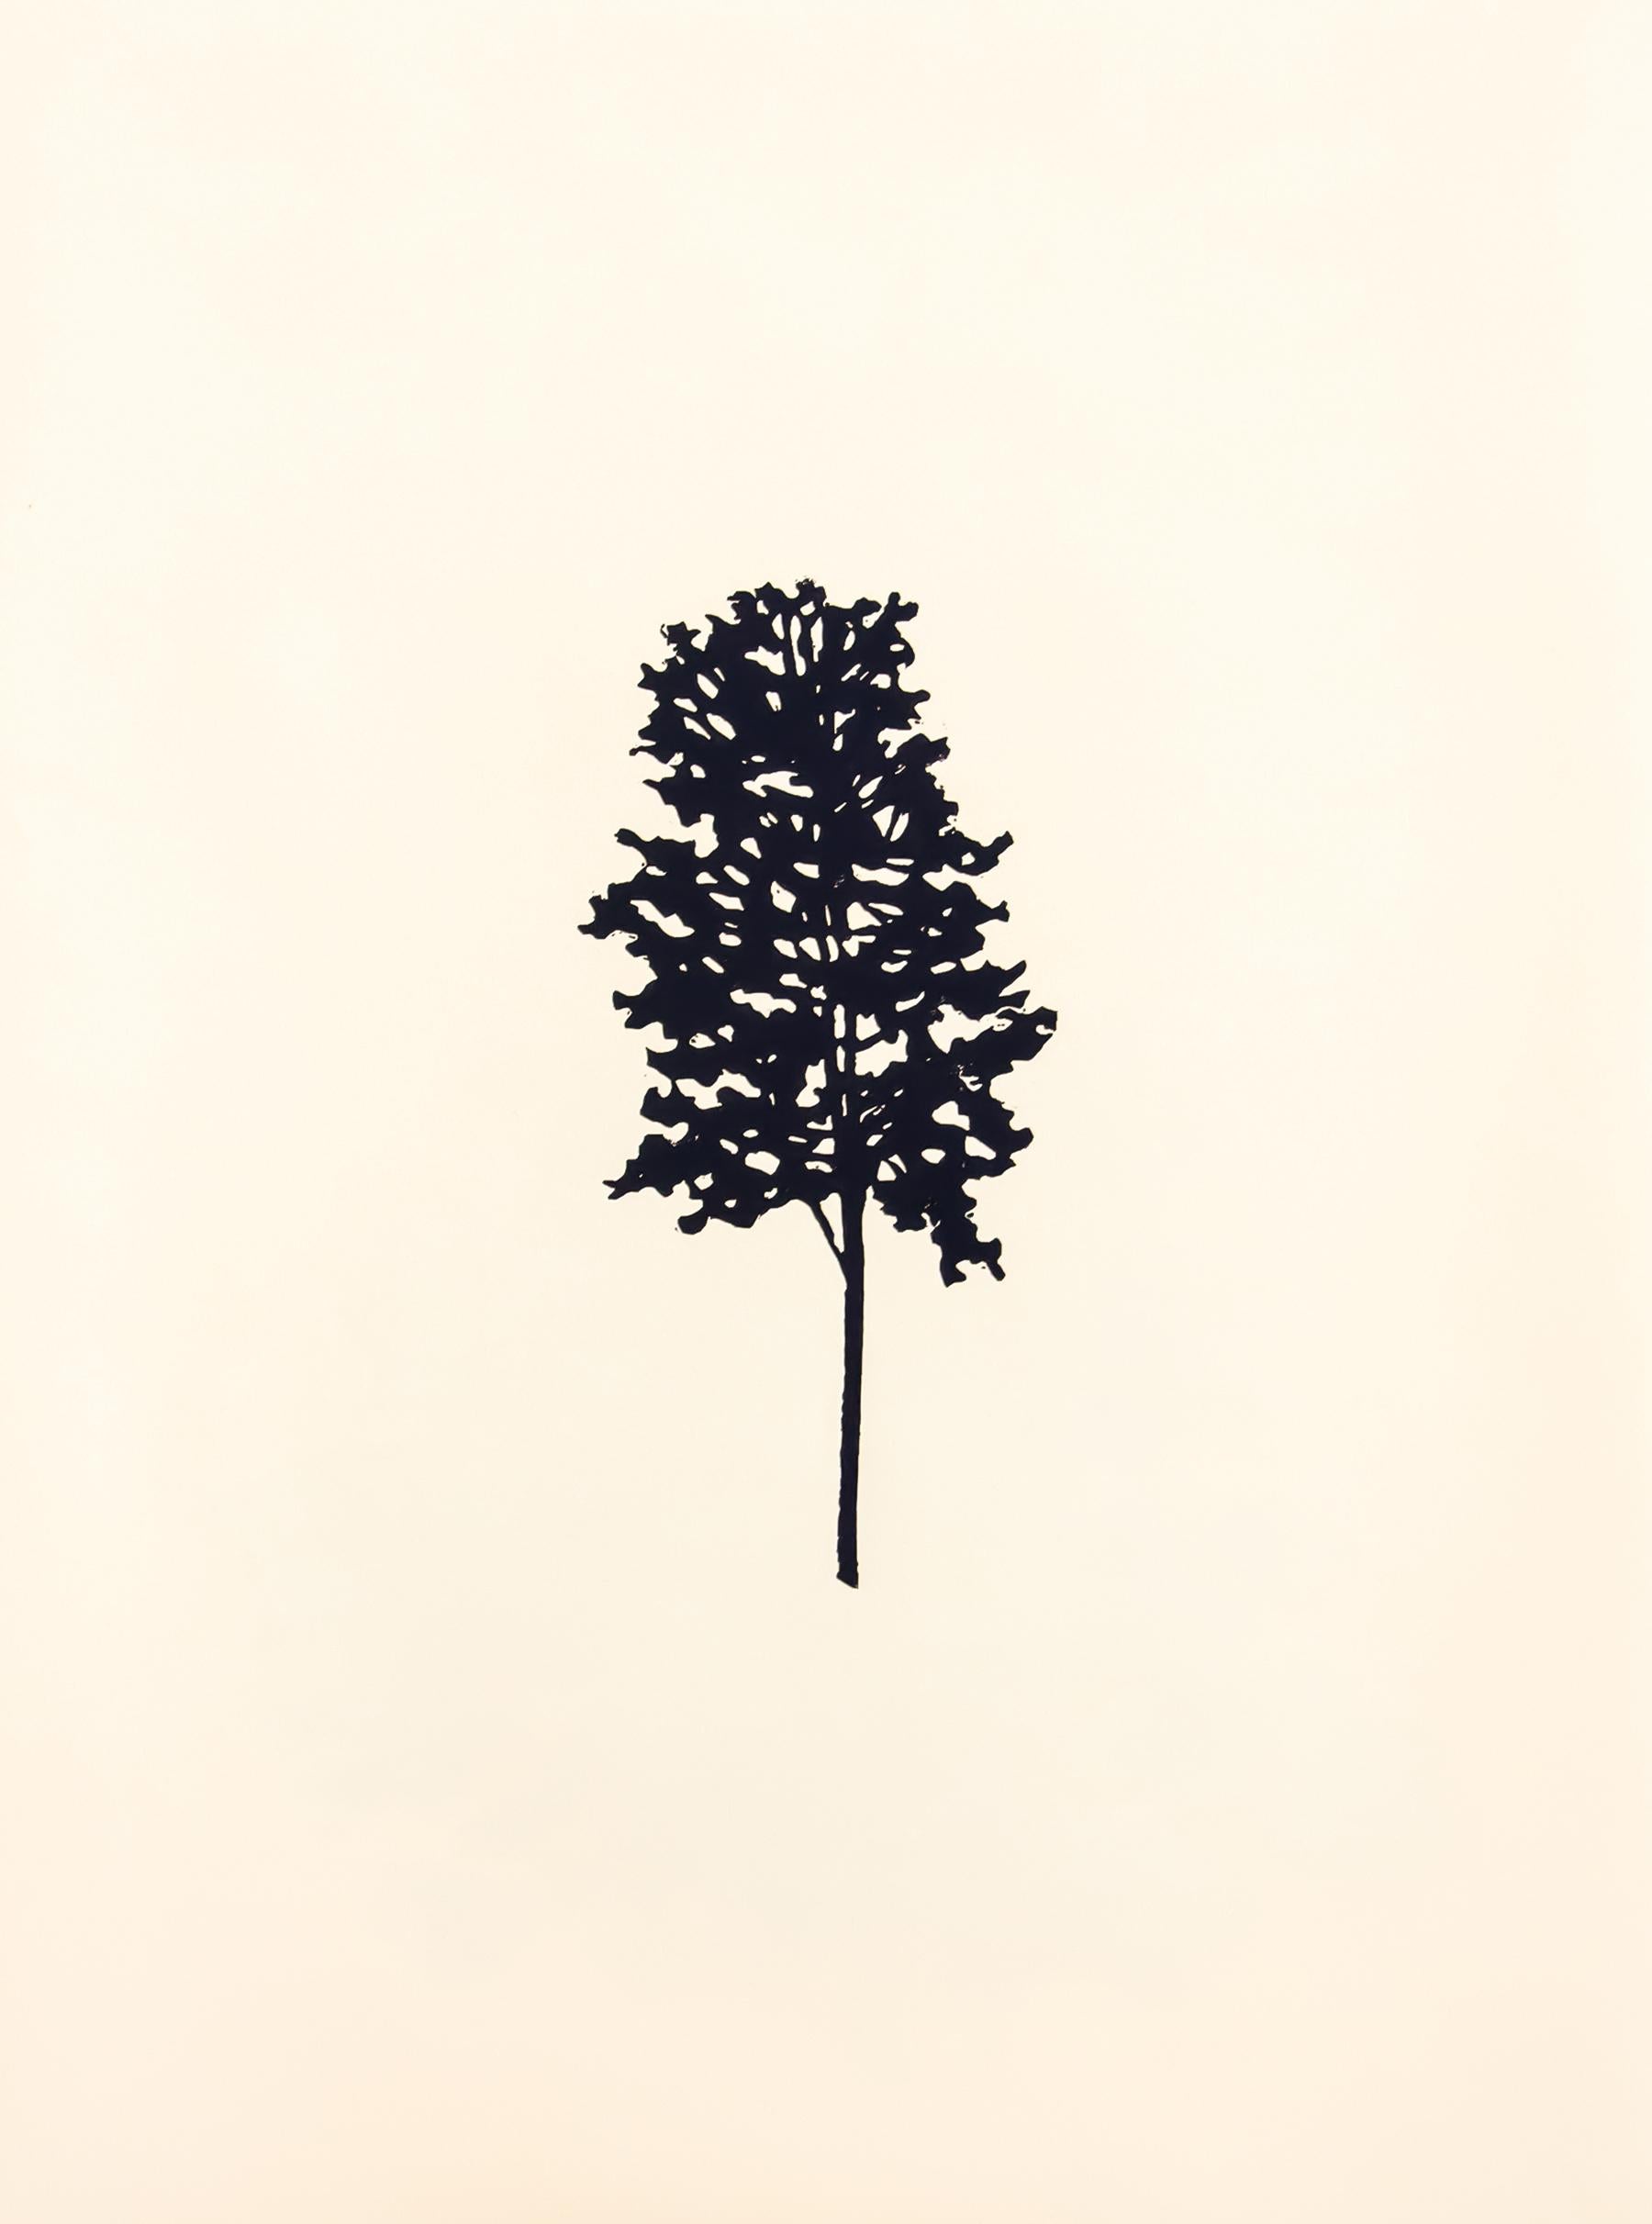 Der Wald or The Forest consists of nine wood block prints in a single portfolio. In each of the nine images a single tree is printed cleanly in solid black on manila colored archival art paper. The trees -- tall, short, high or low on the page,